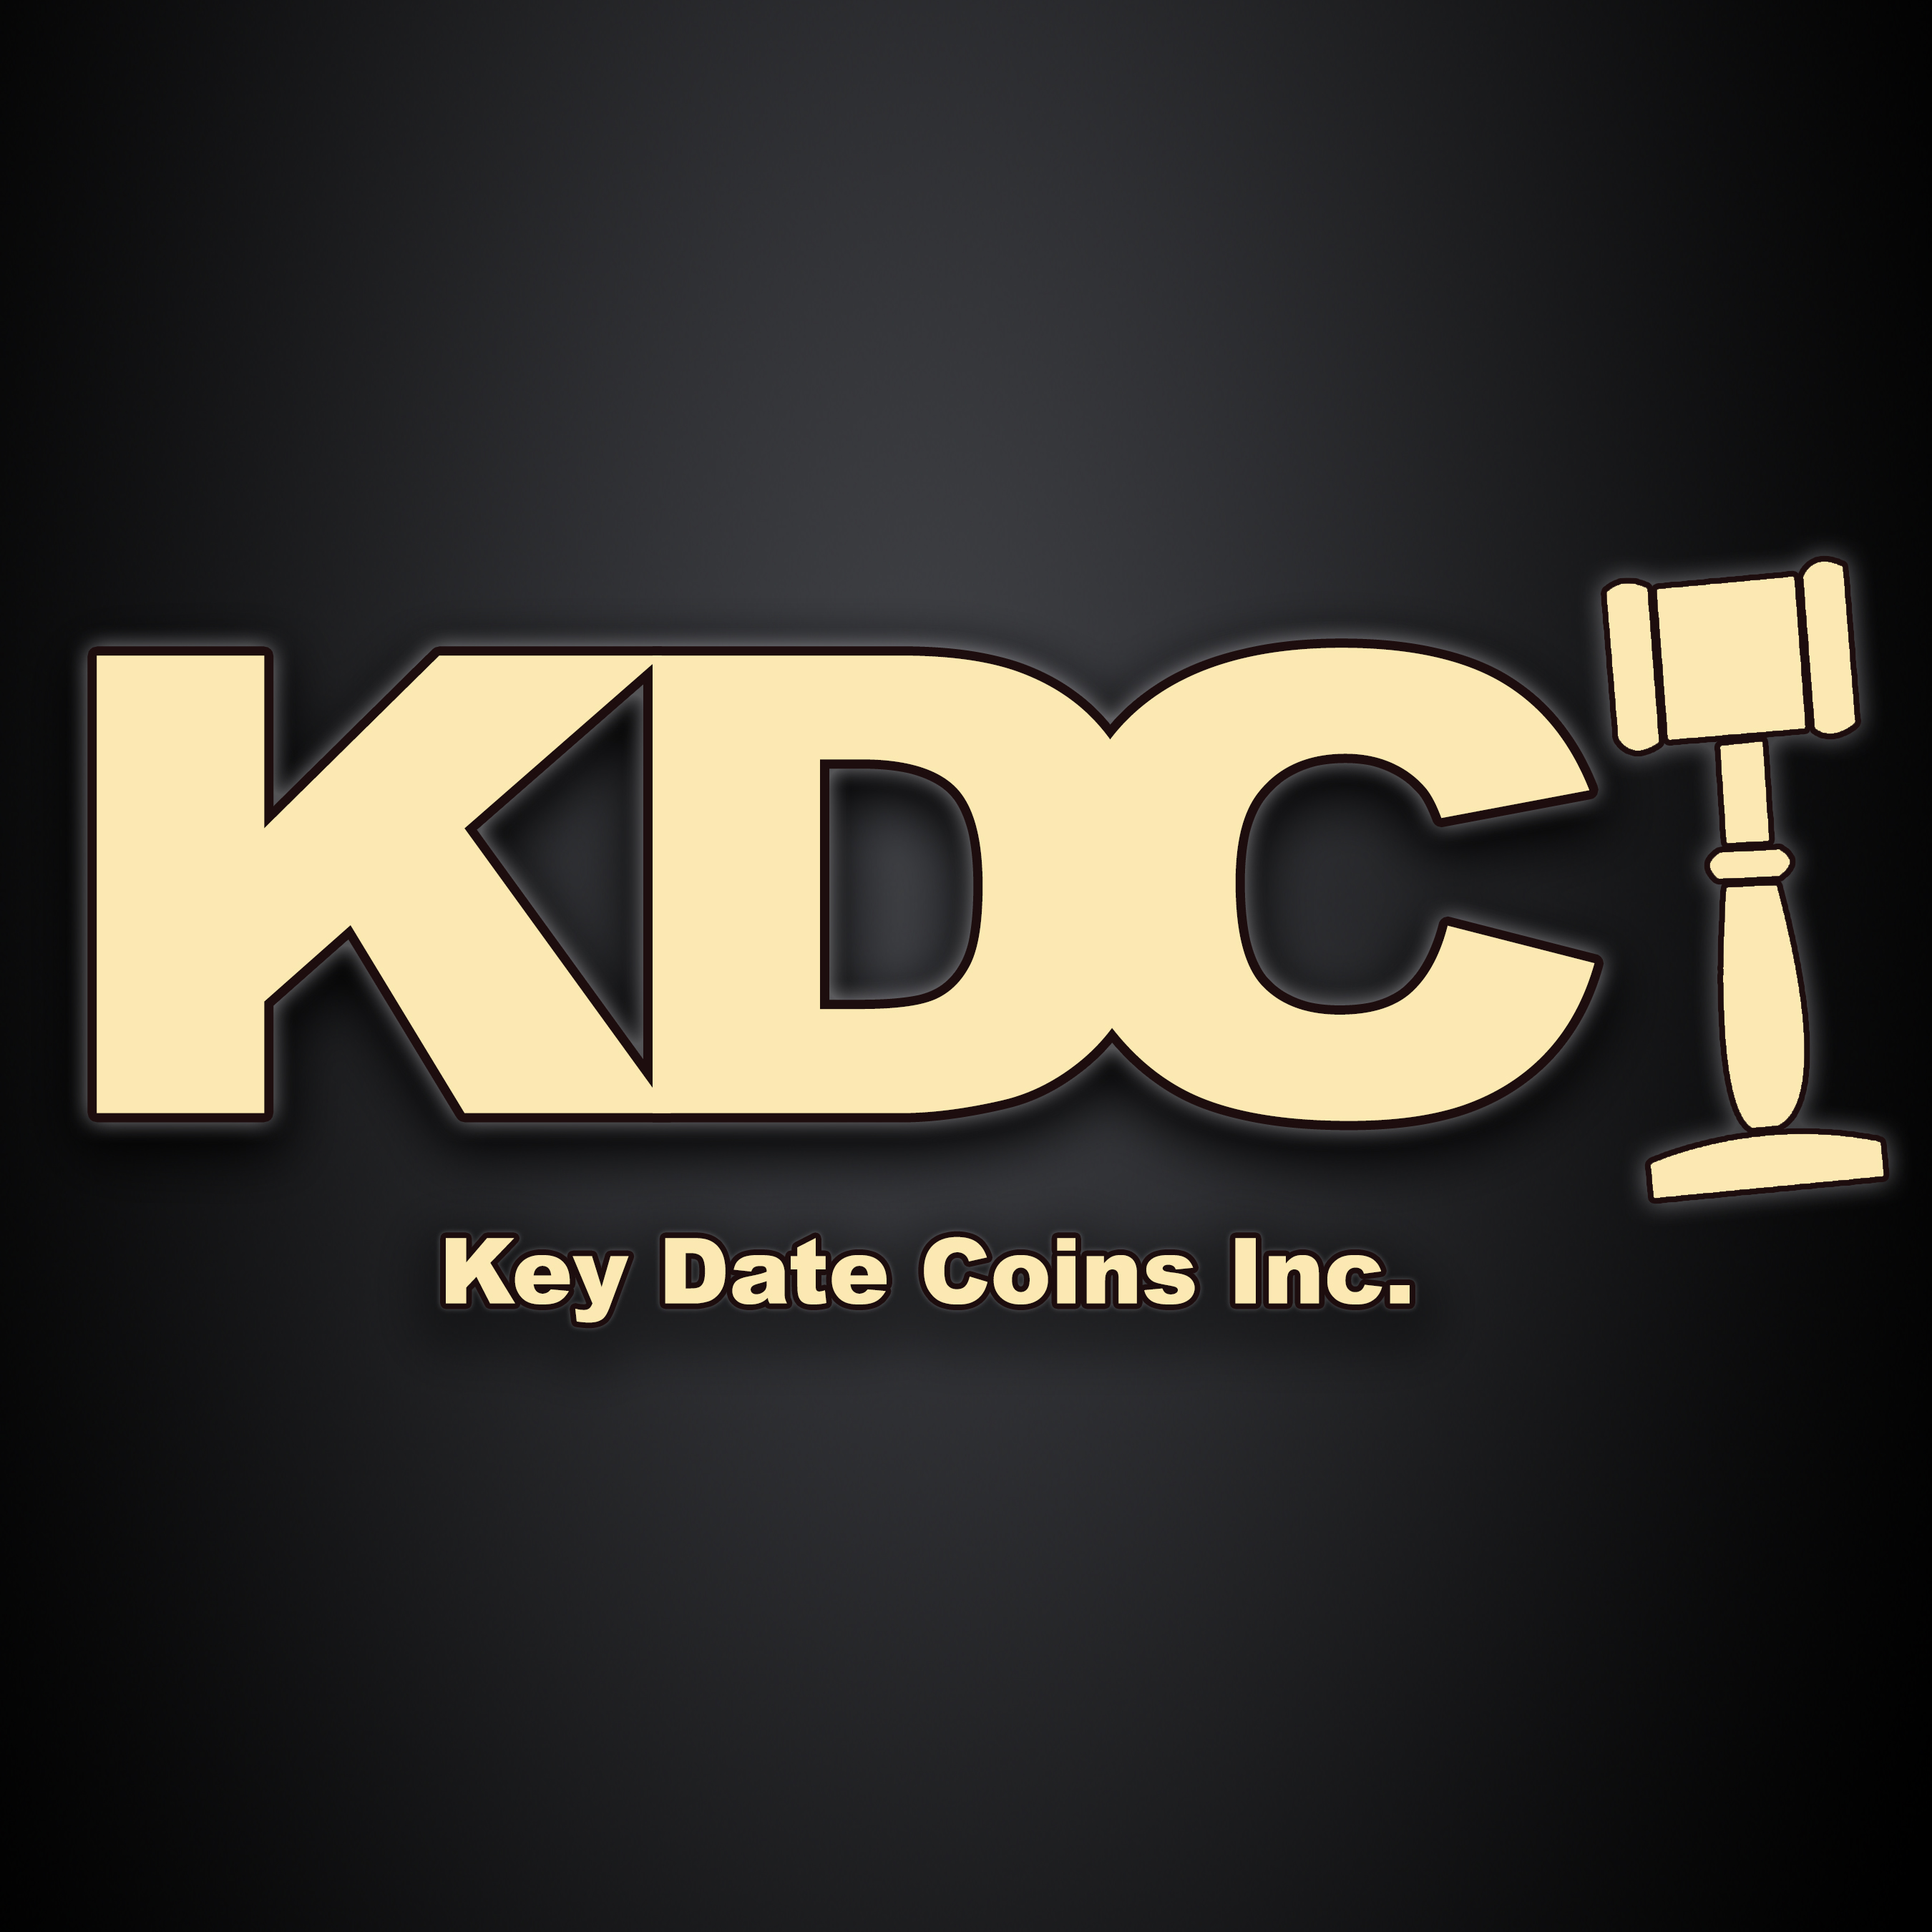 Key Date Coins